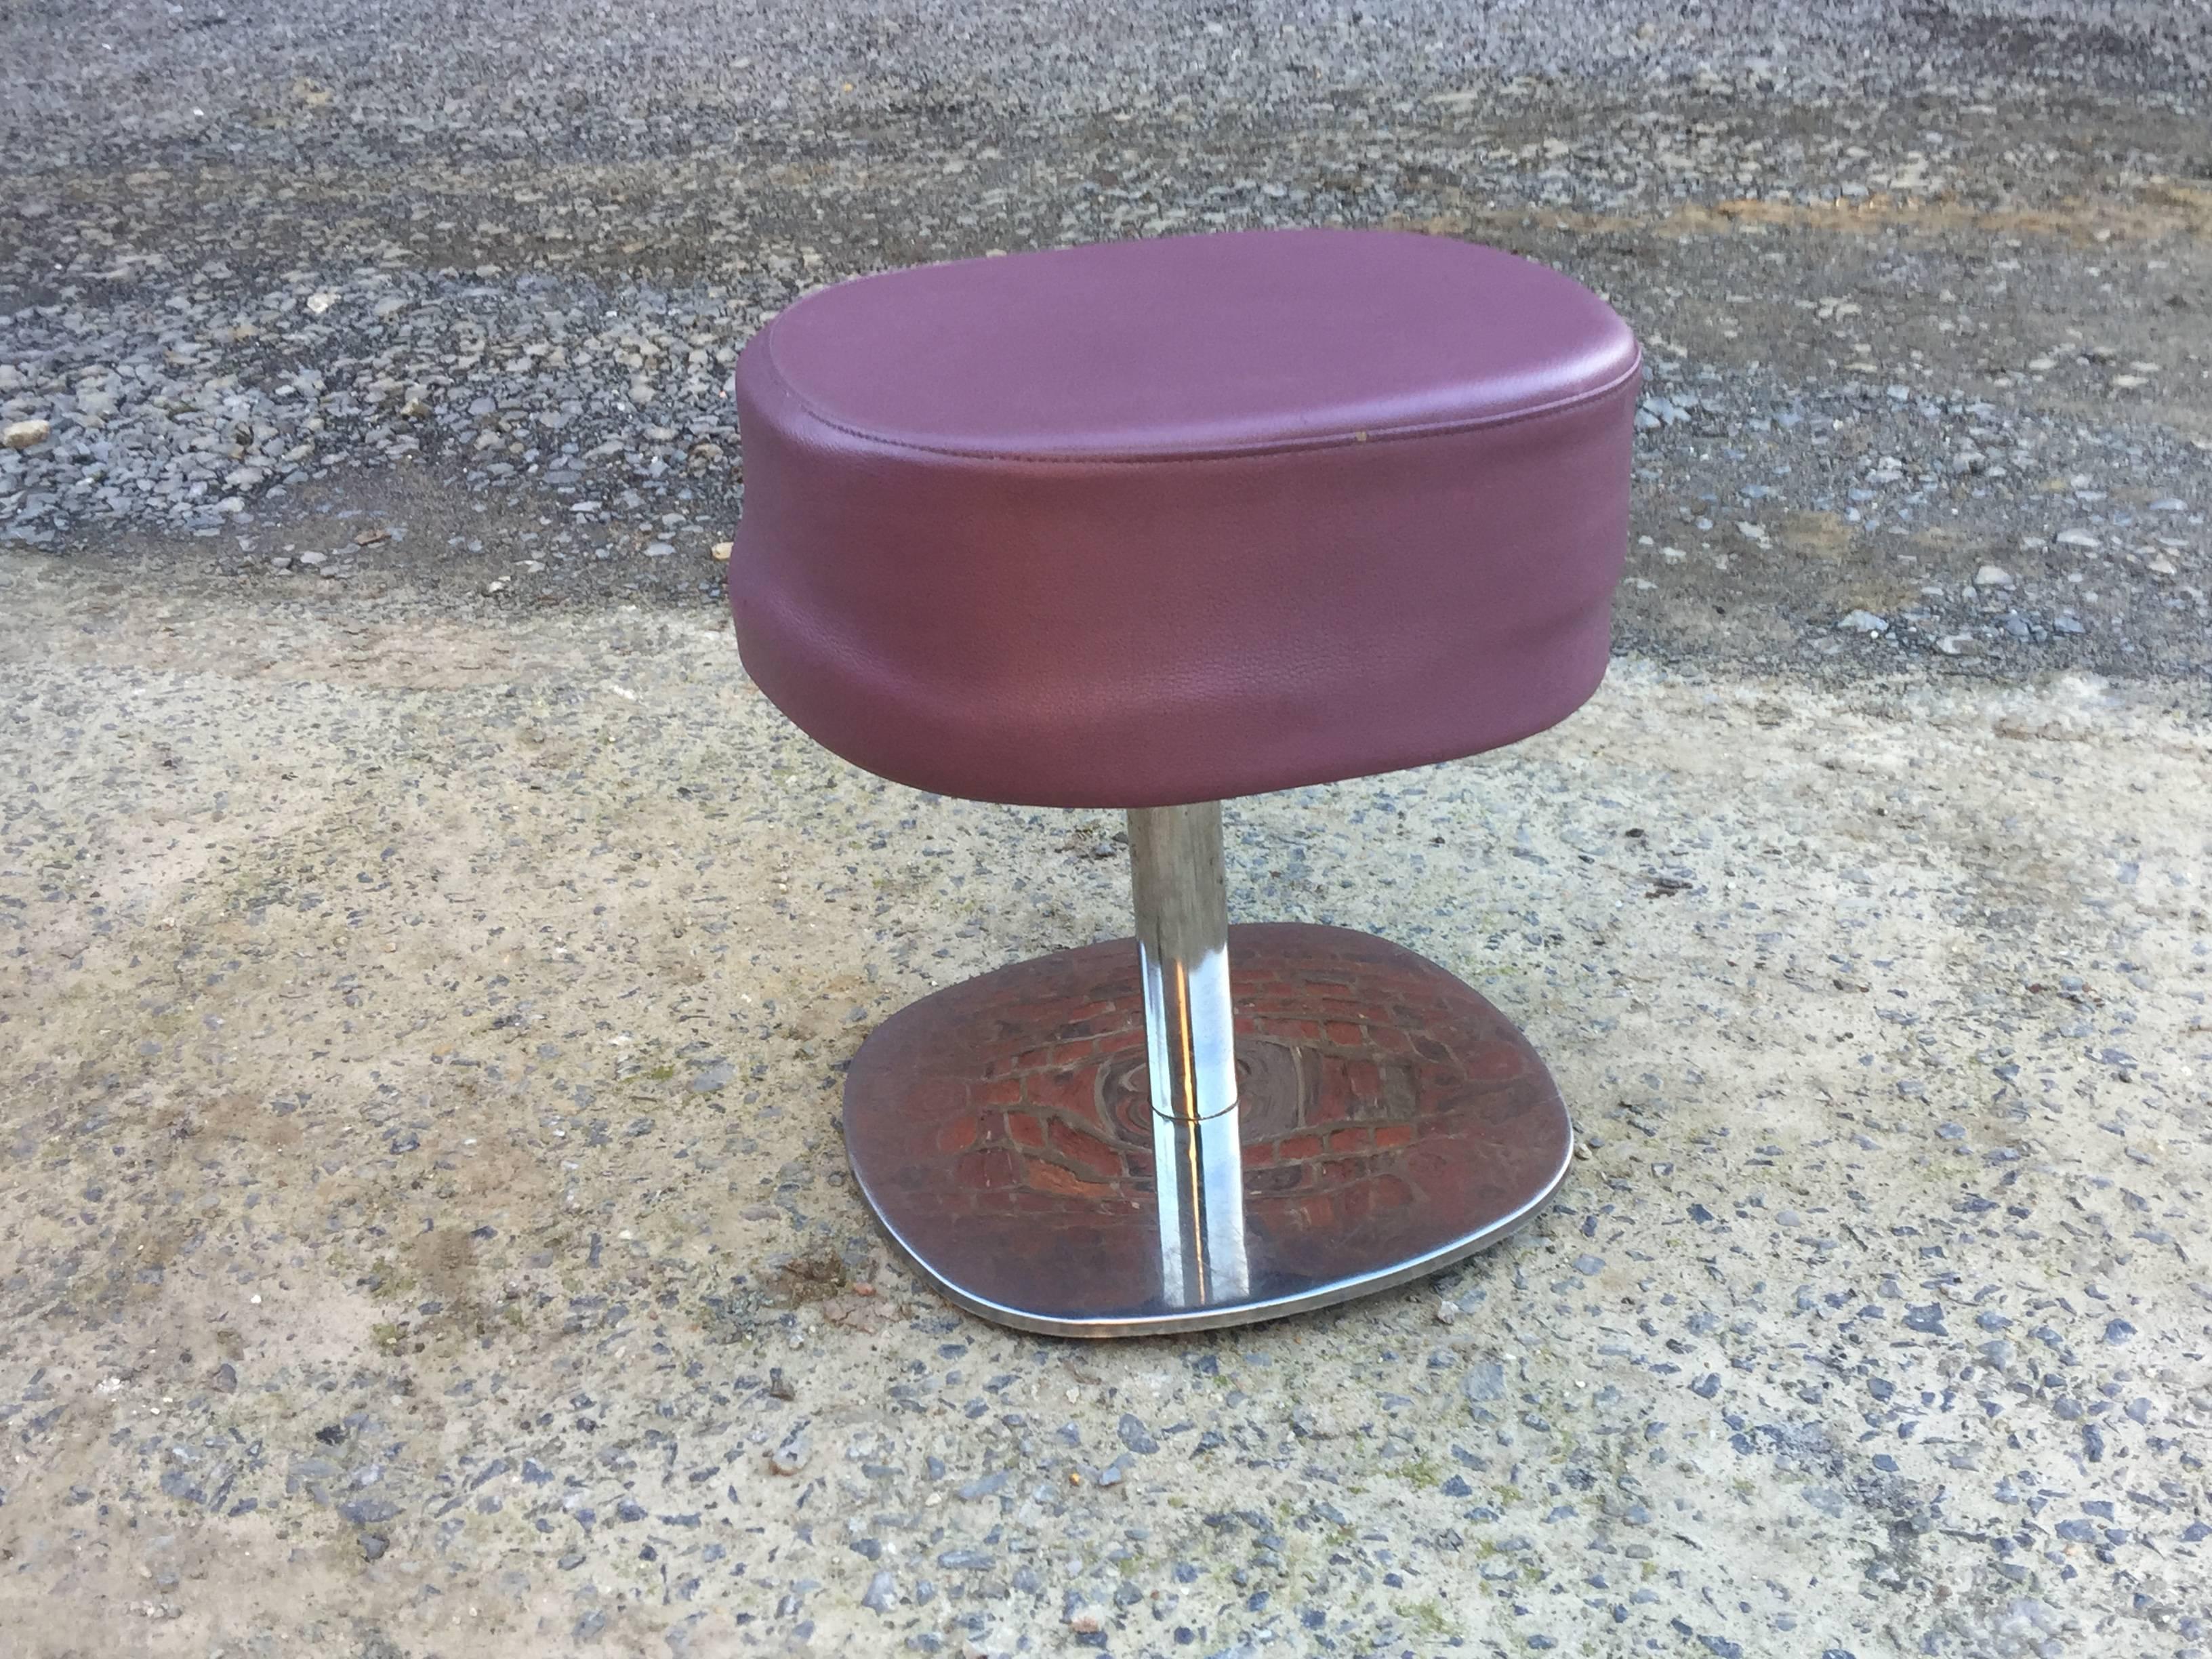  five stools in chromed metal and leatherette, circa 1970
Very good condition.